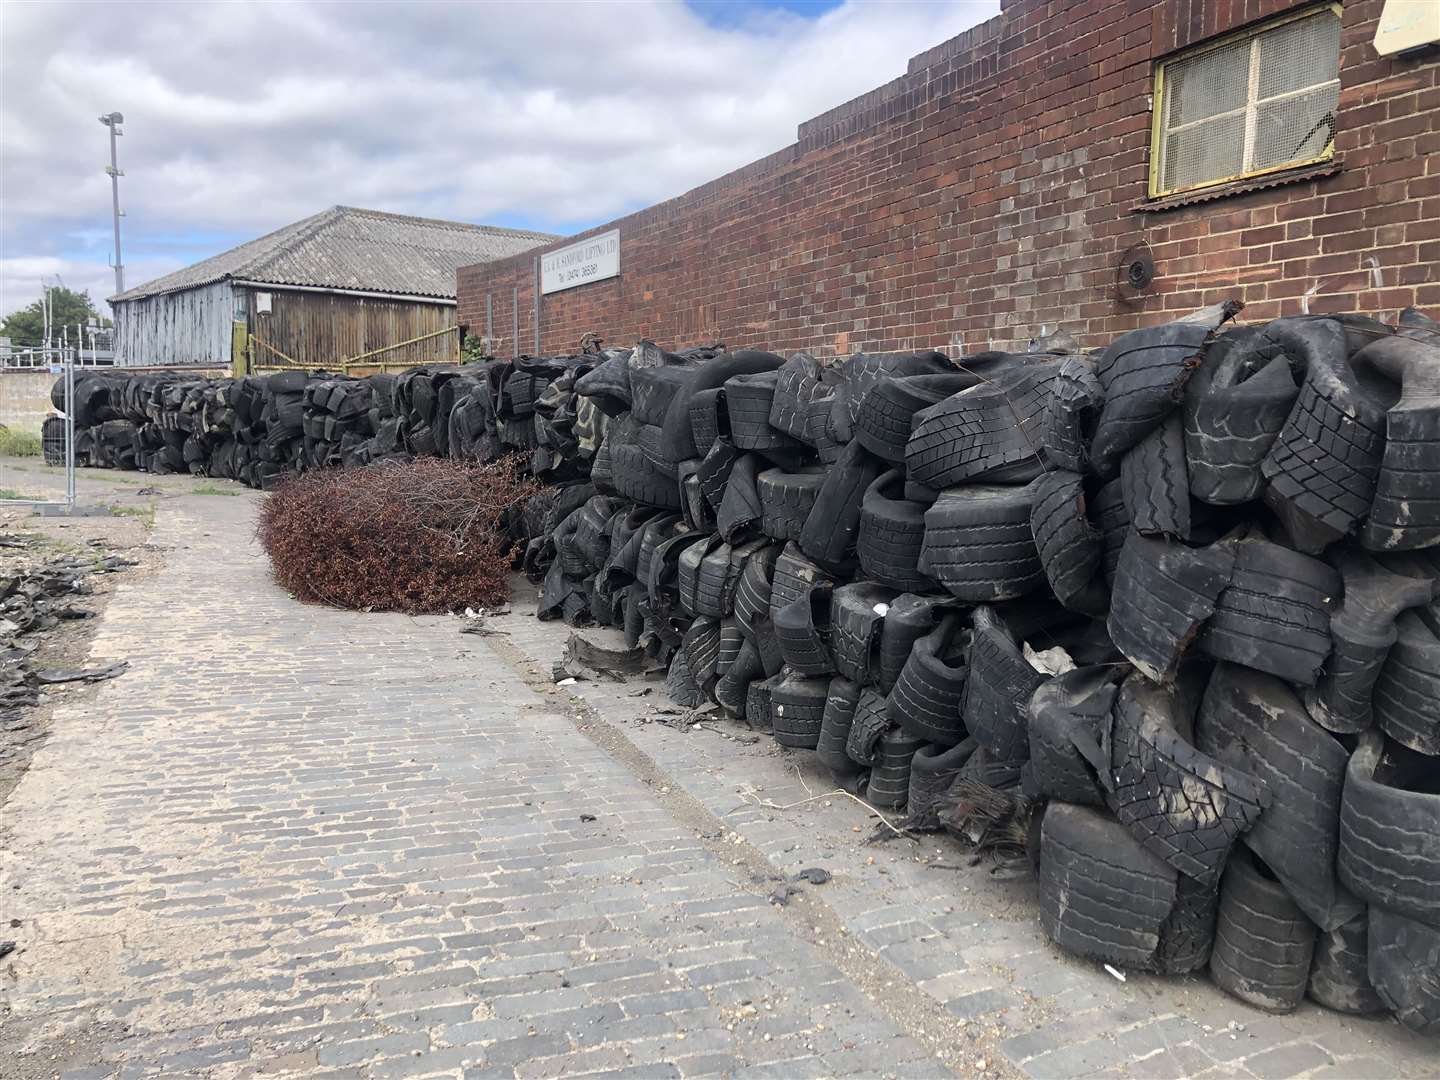 Some of the tyres stacked up along the route